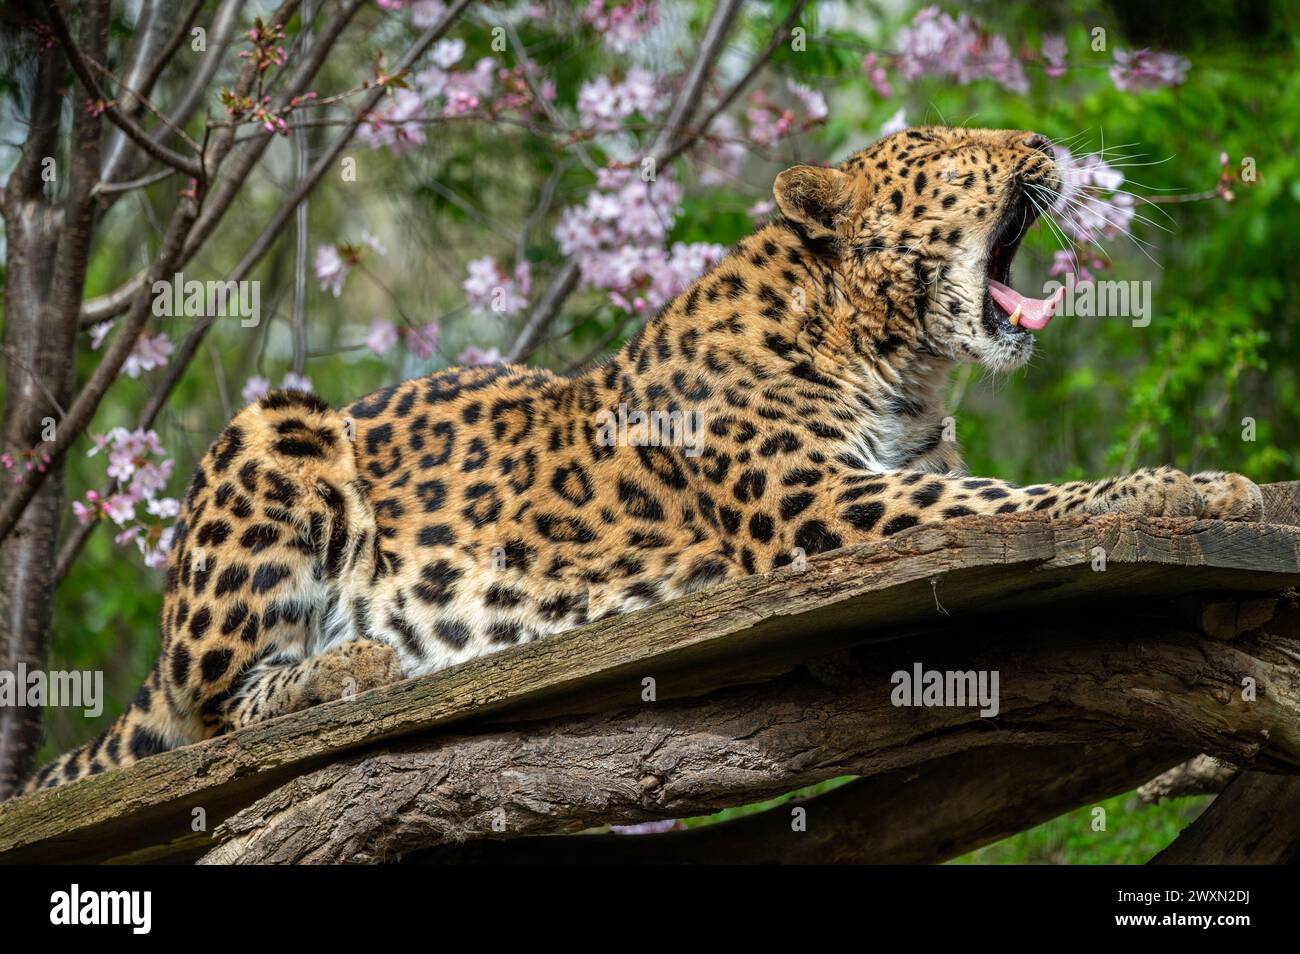 A leopard resting on a tree log while yawning Stock Photo